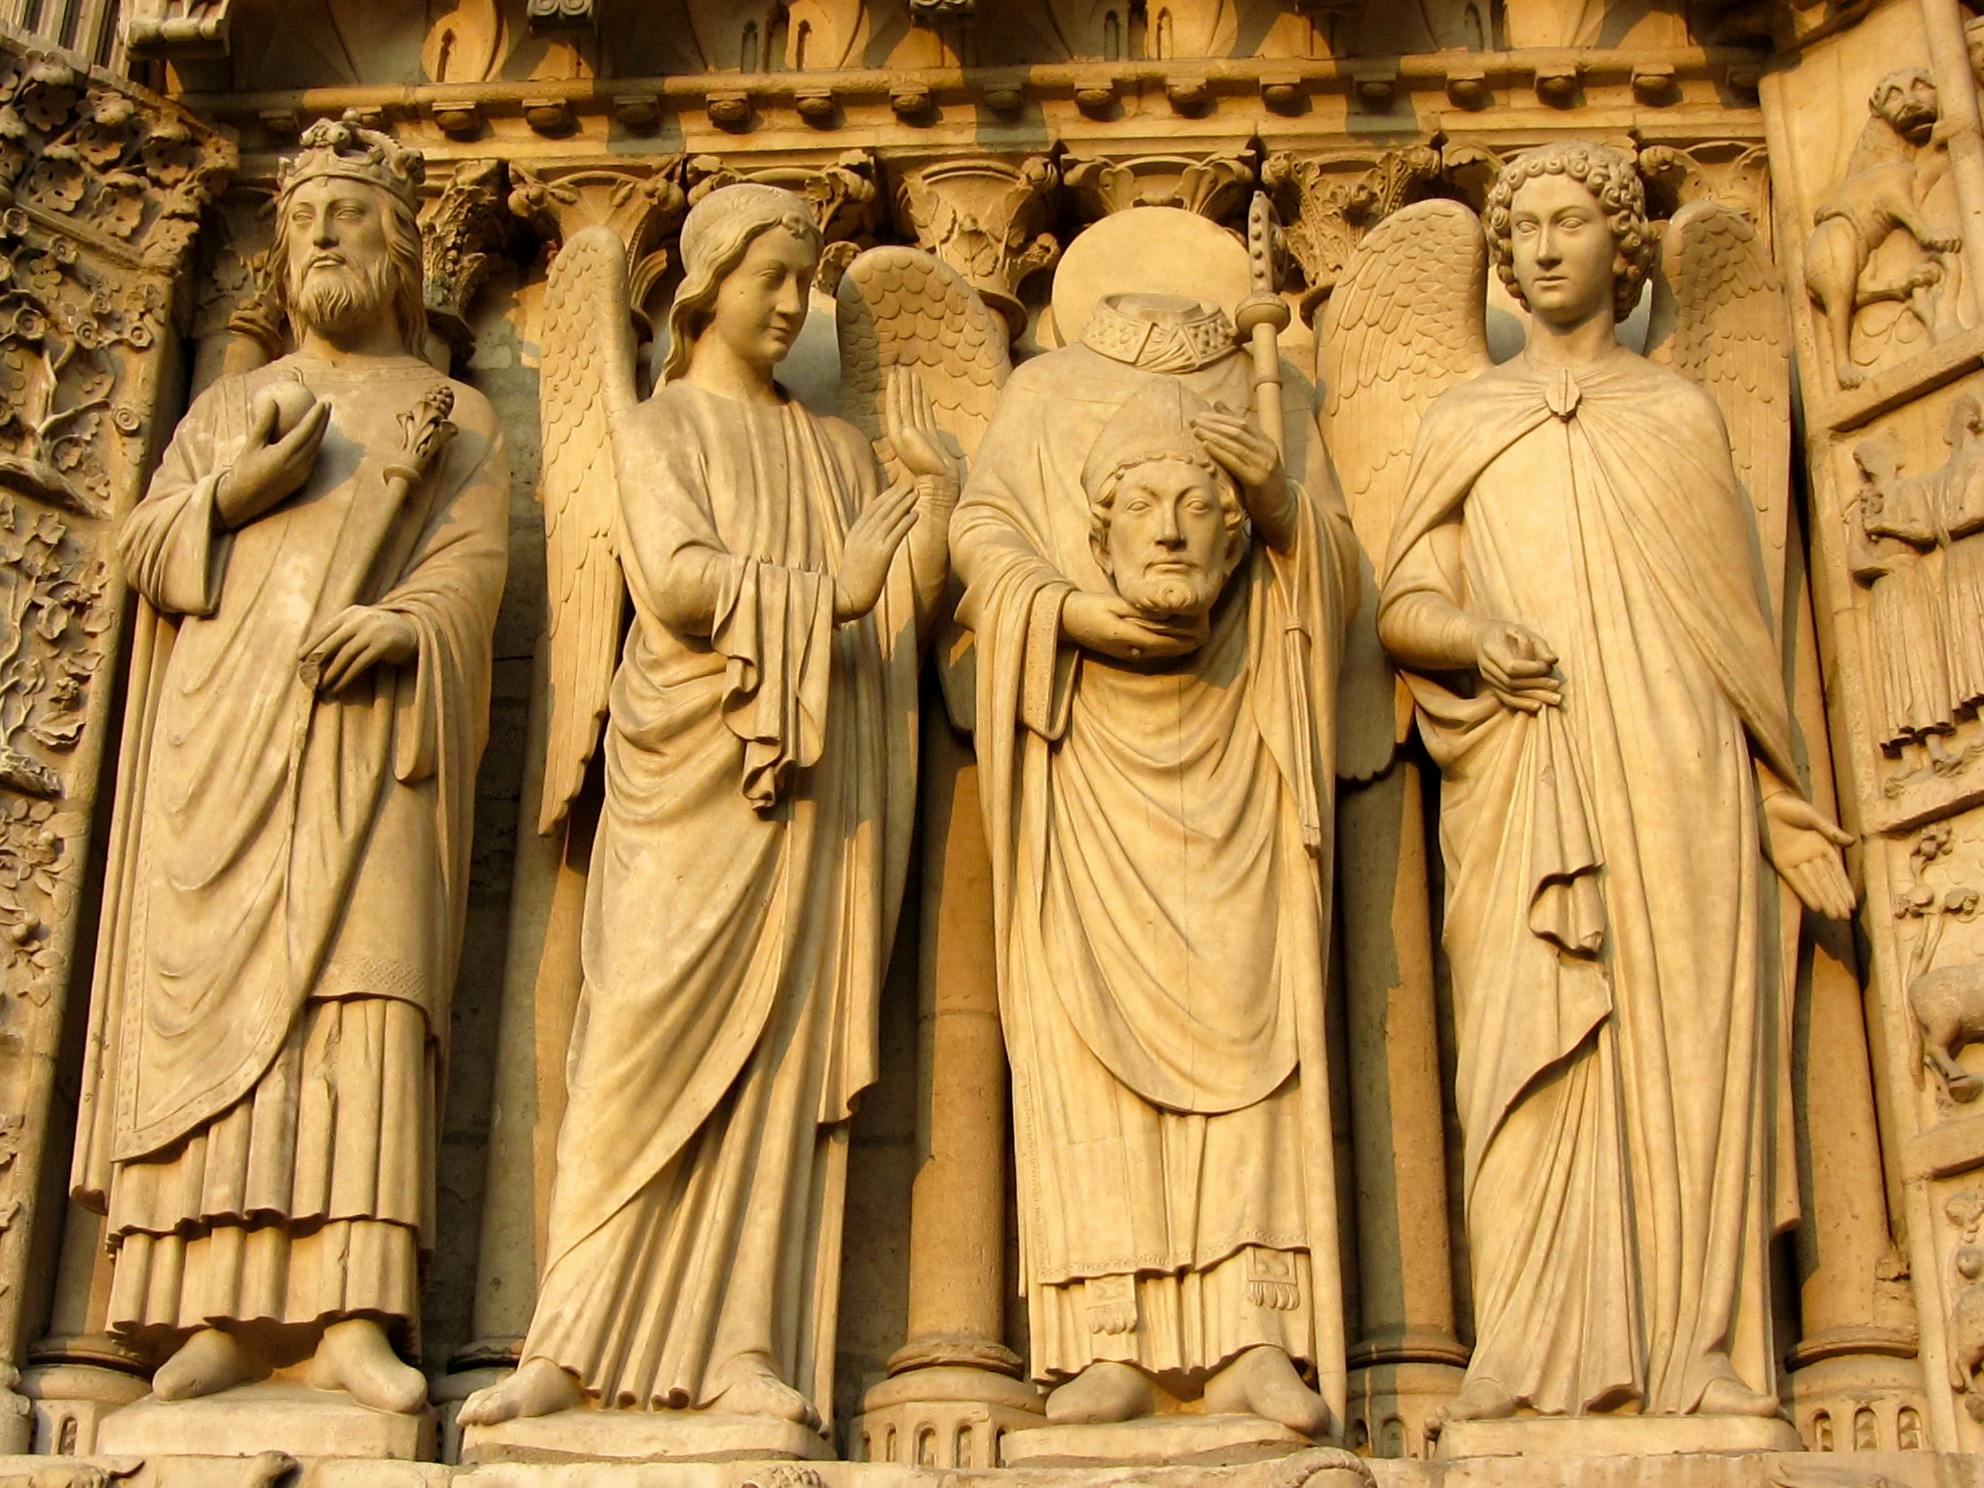 a group of statues on the side of a building, by Louis Hersent, flickr, npc with a saint's halo, cathedrals, thumbnail, wearing brown robes